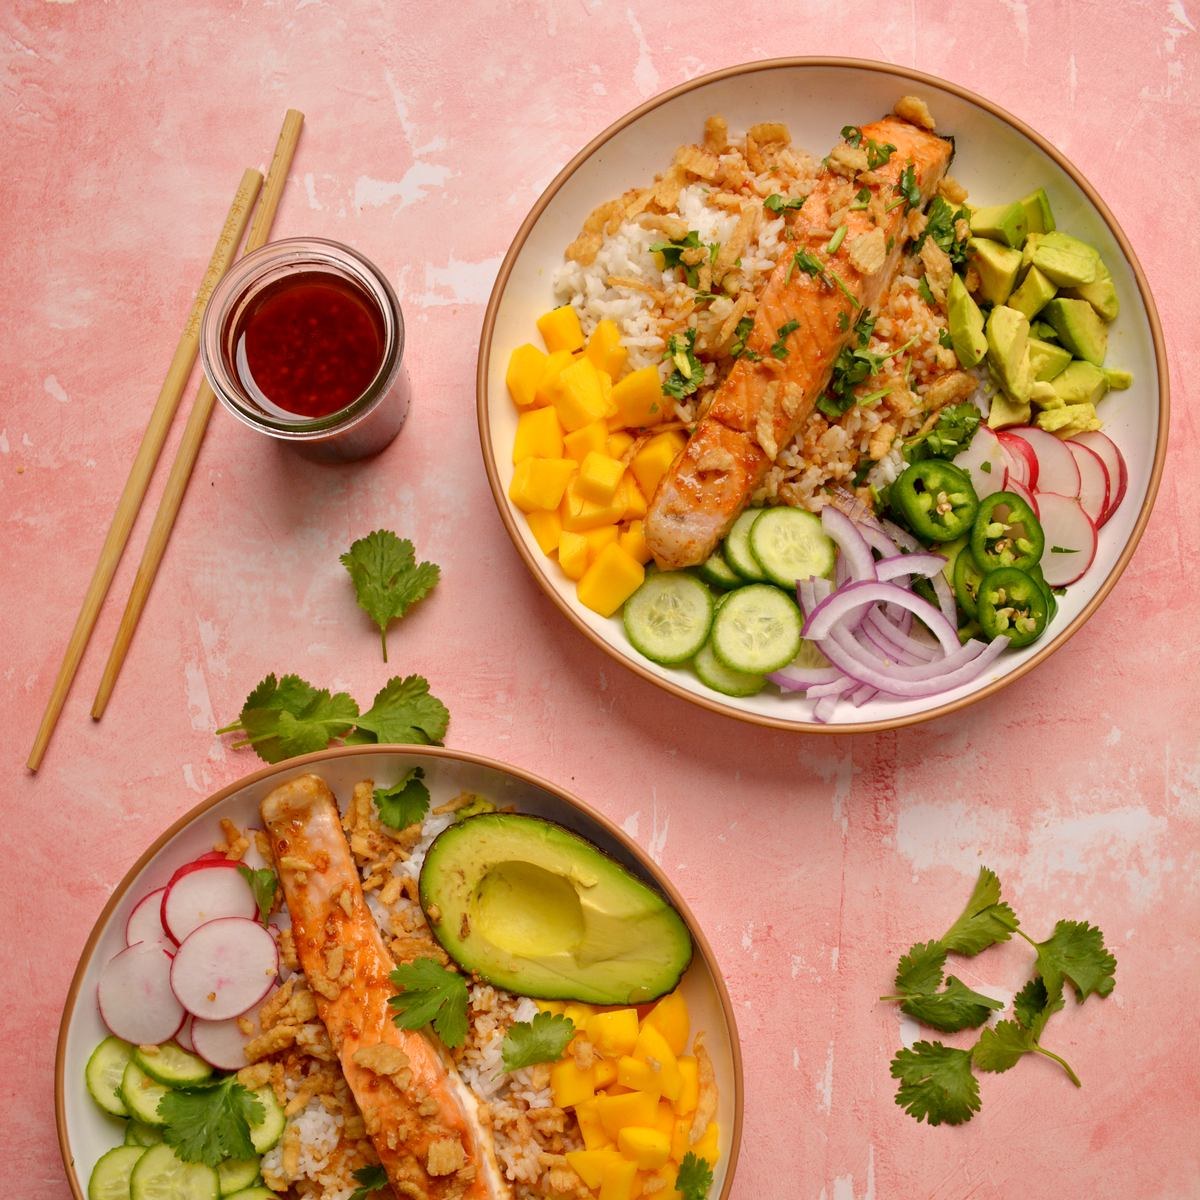 Two shallow bowls filled with rice, salmon, and various fruits and vegetables.